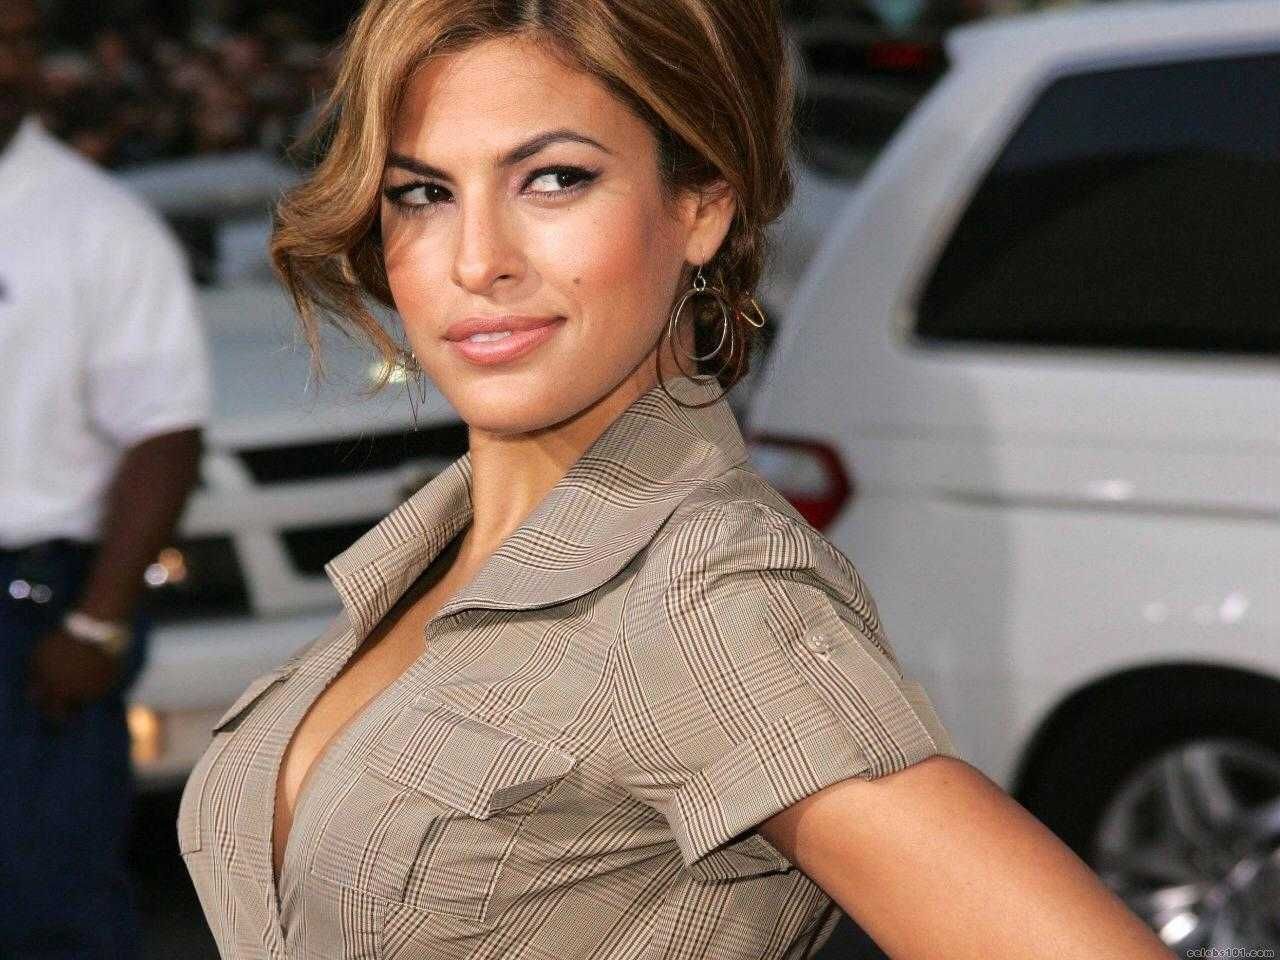 'I Hope So' - The possible end to Eva Mendes' decade-long hiatus from acting